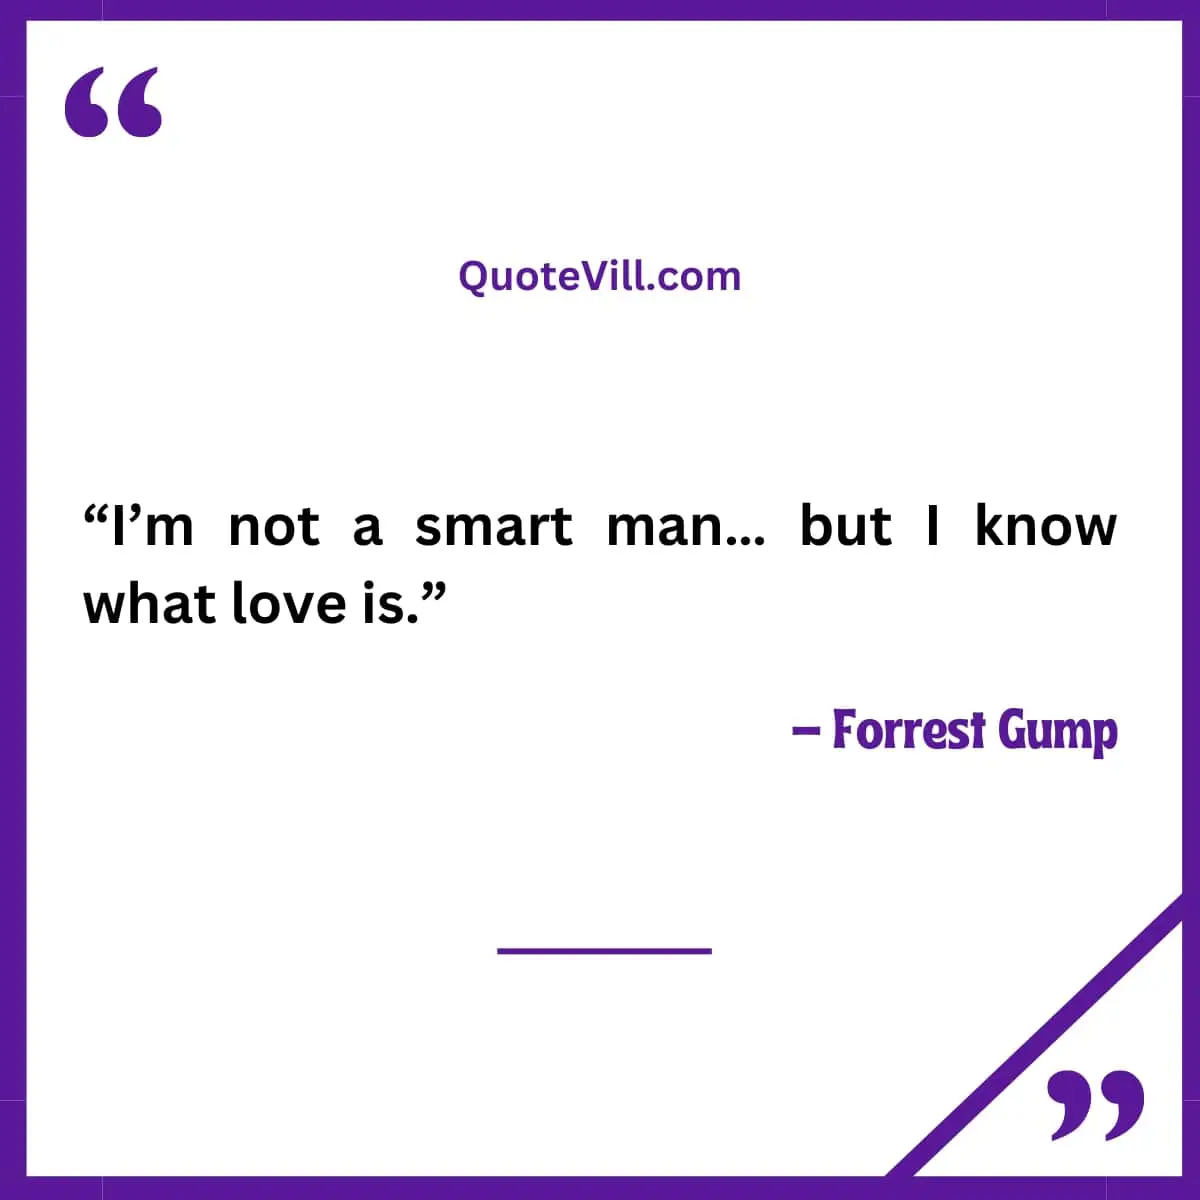 Forrest Gump Quotes On Love